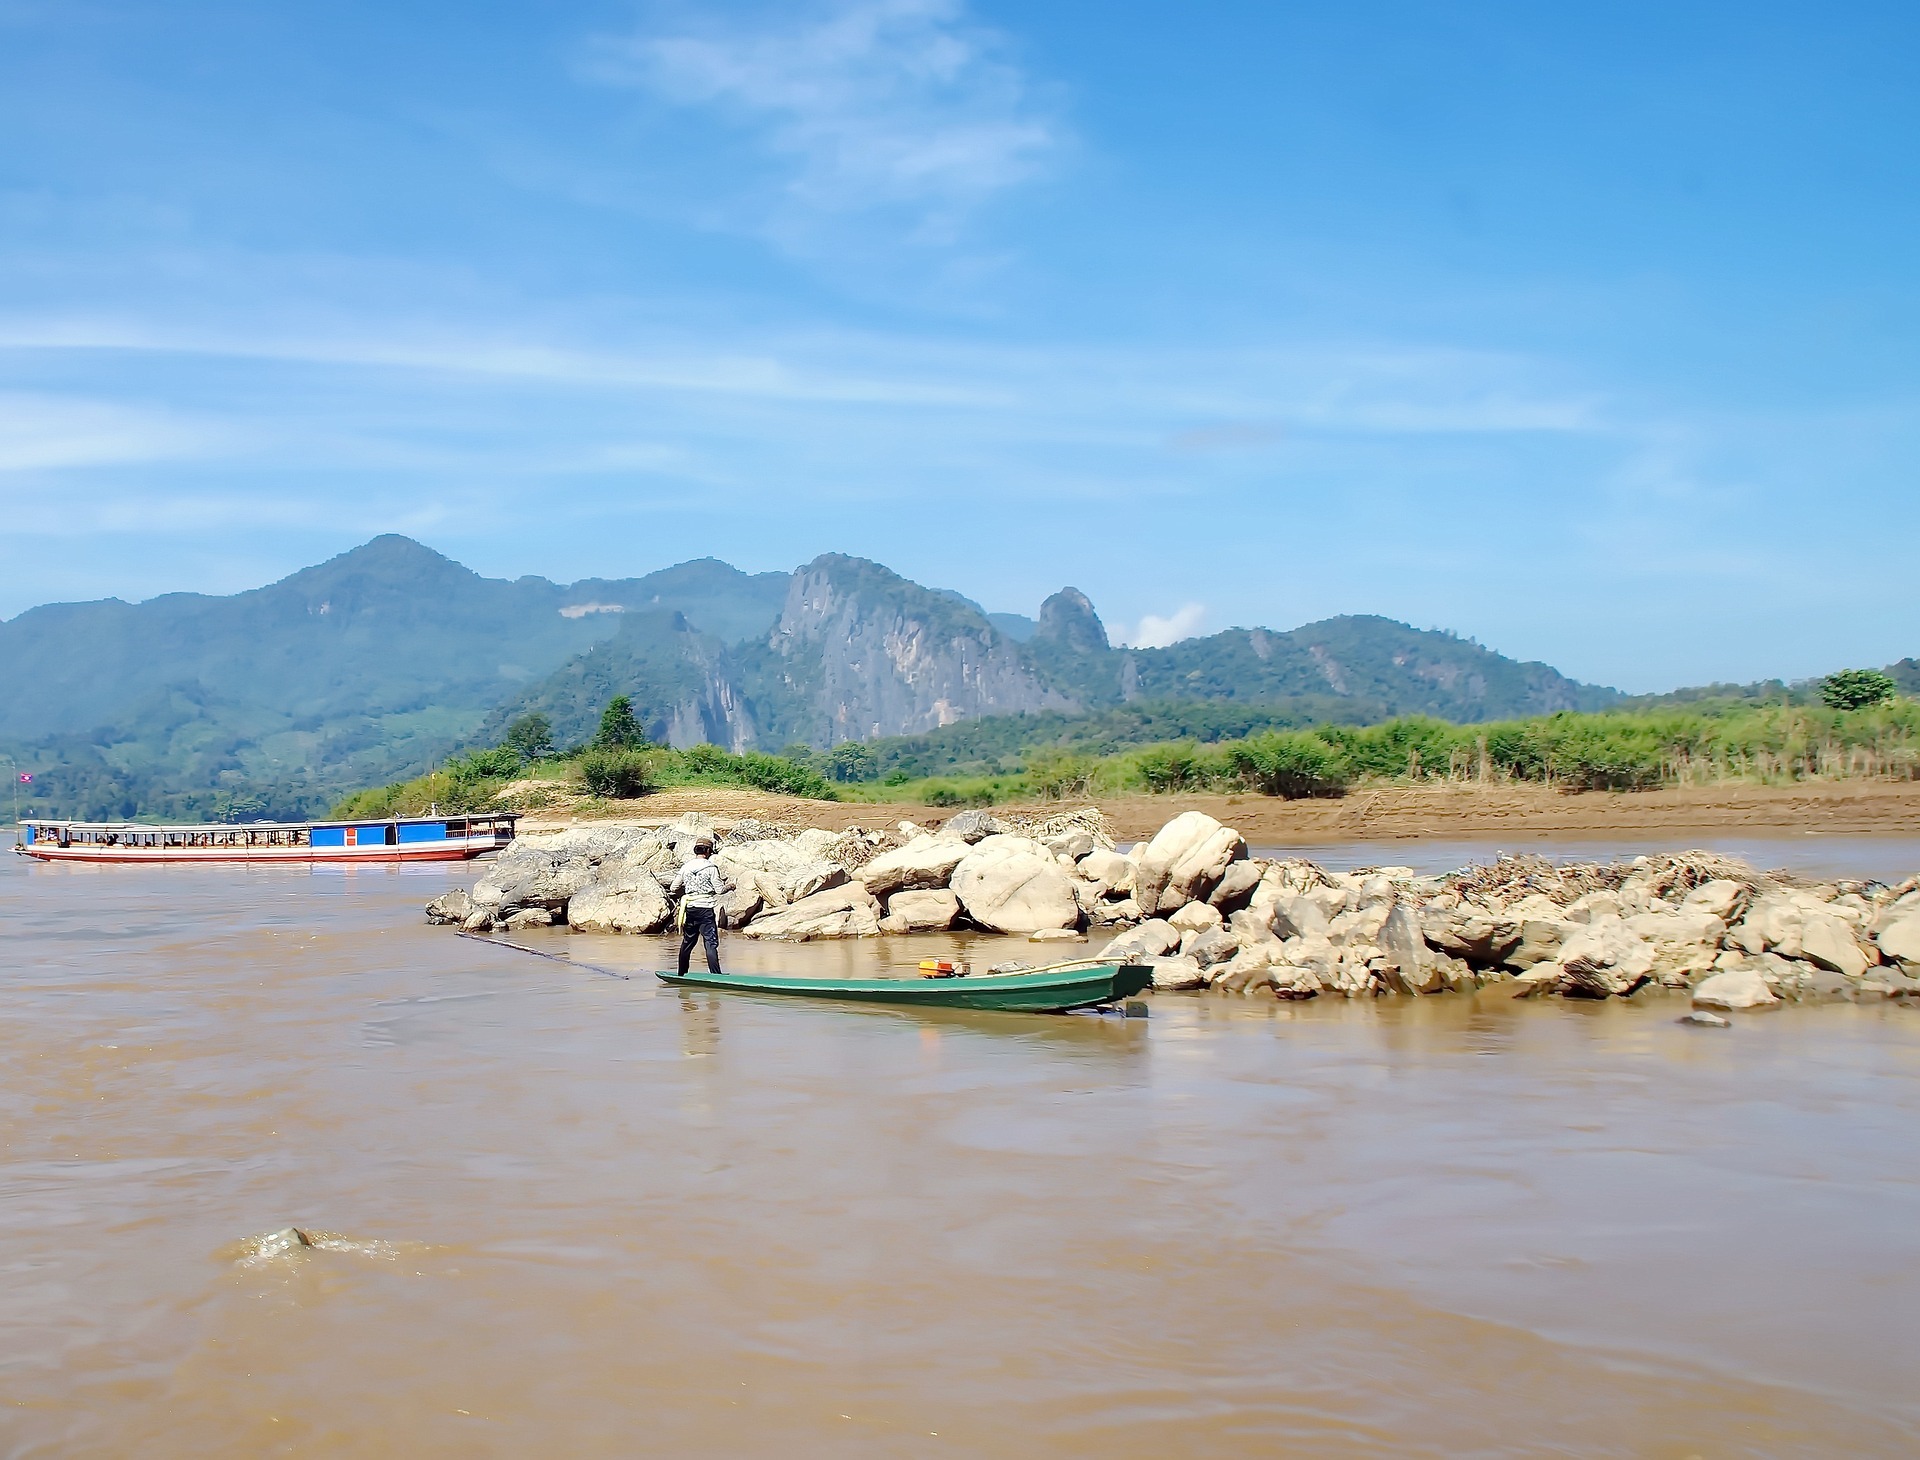 huge-rocks-on-the-river-and-a-fisherman-standing-on-his-boat